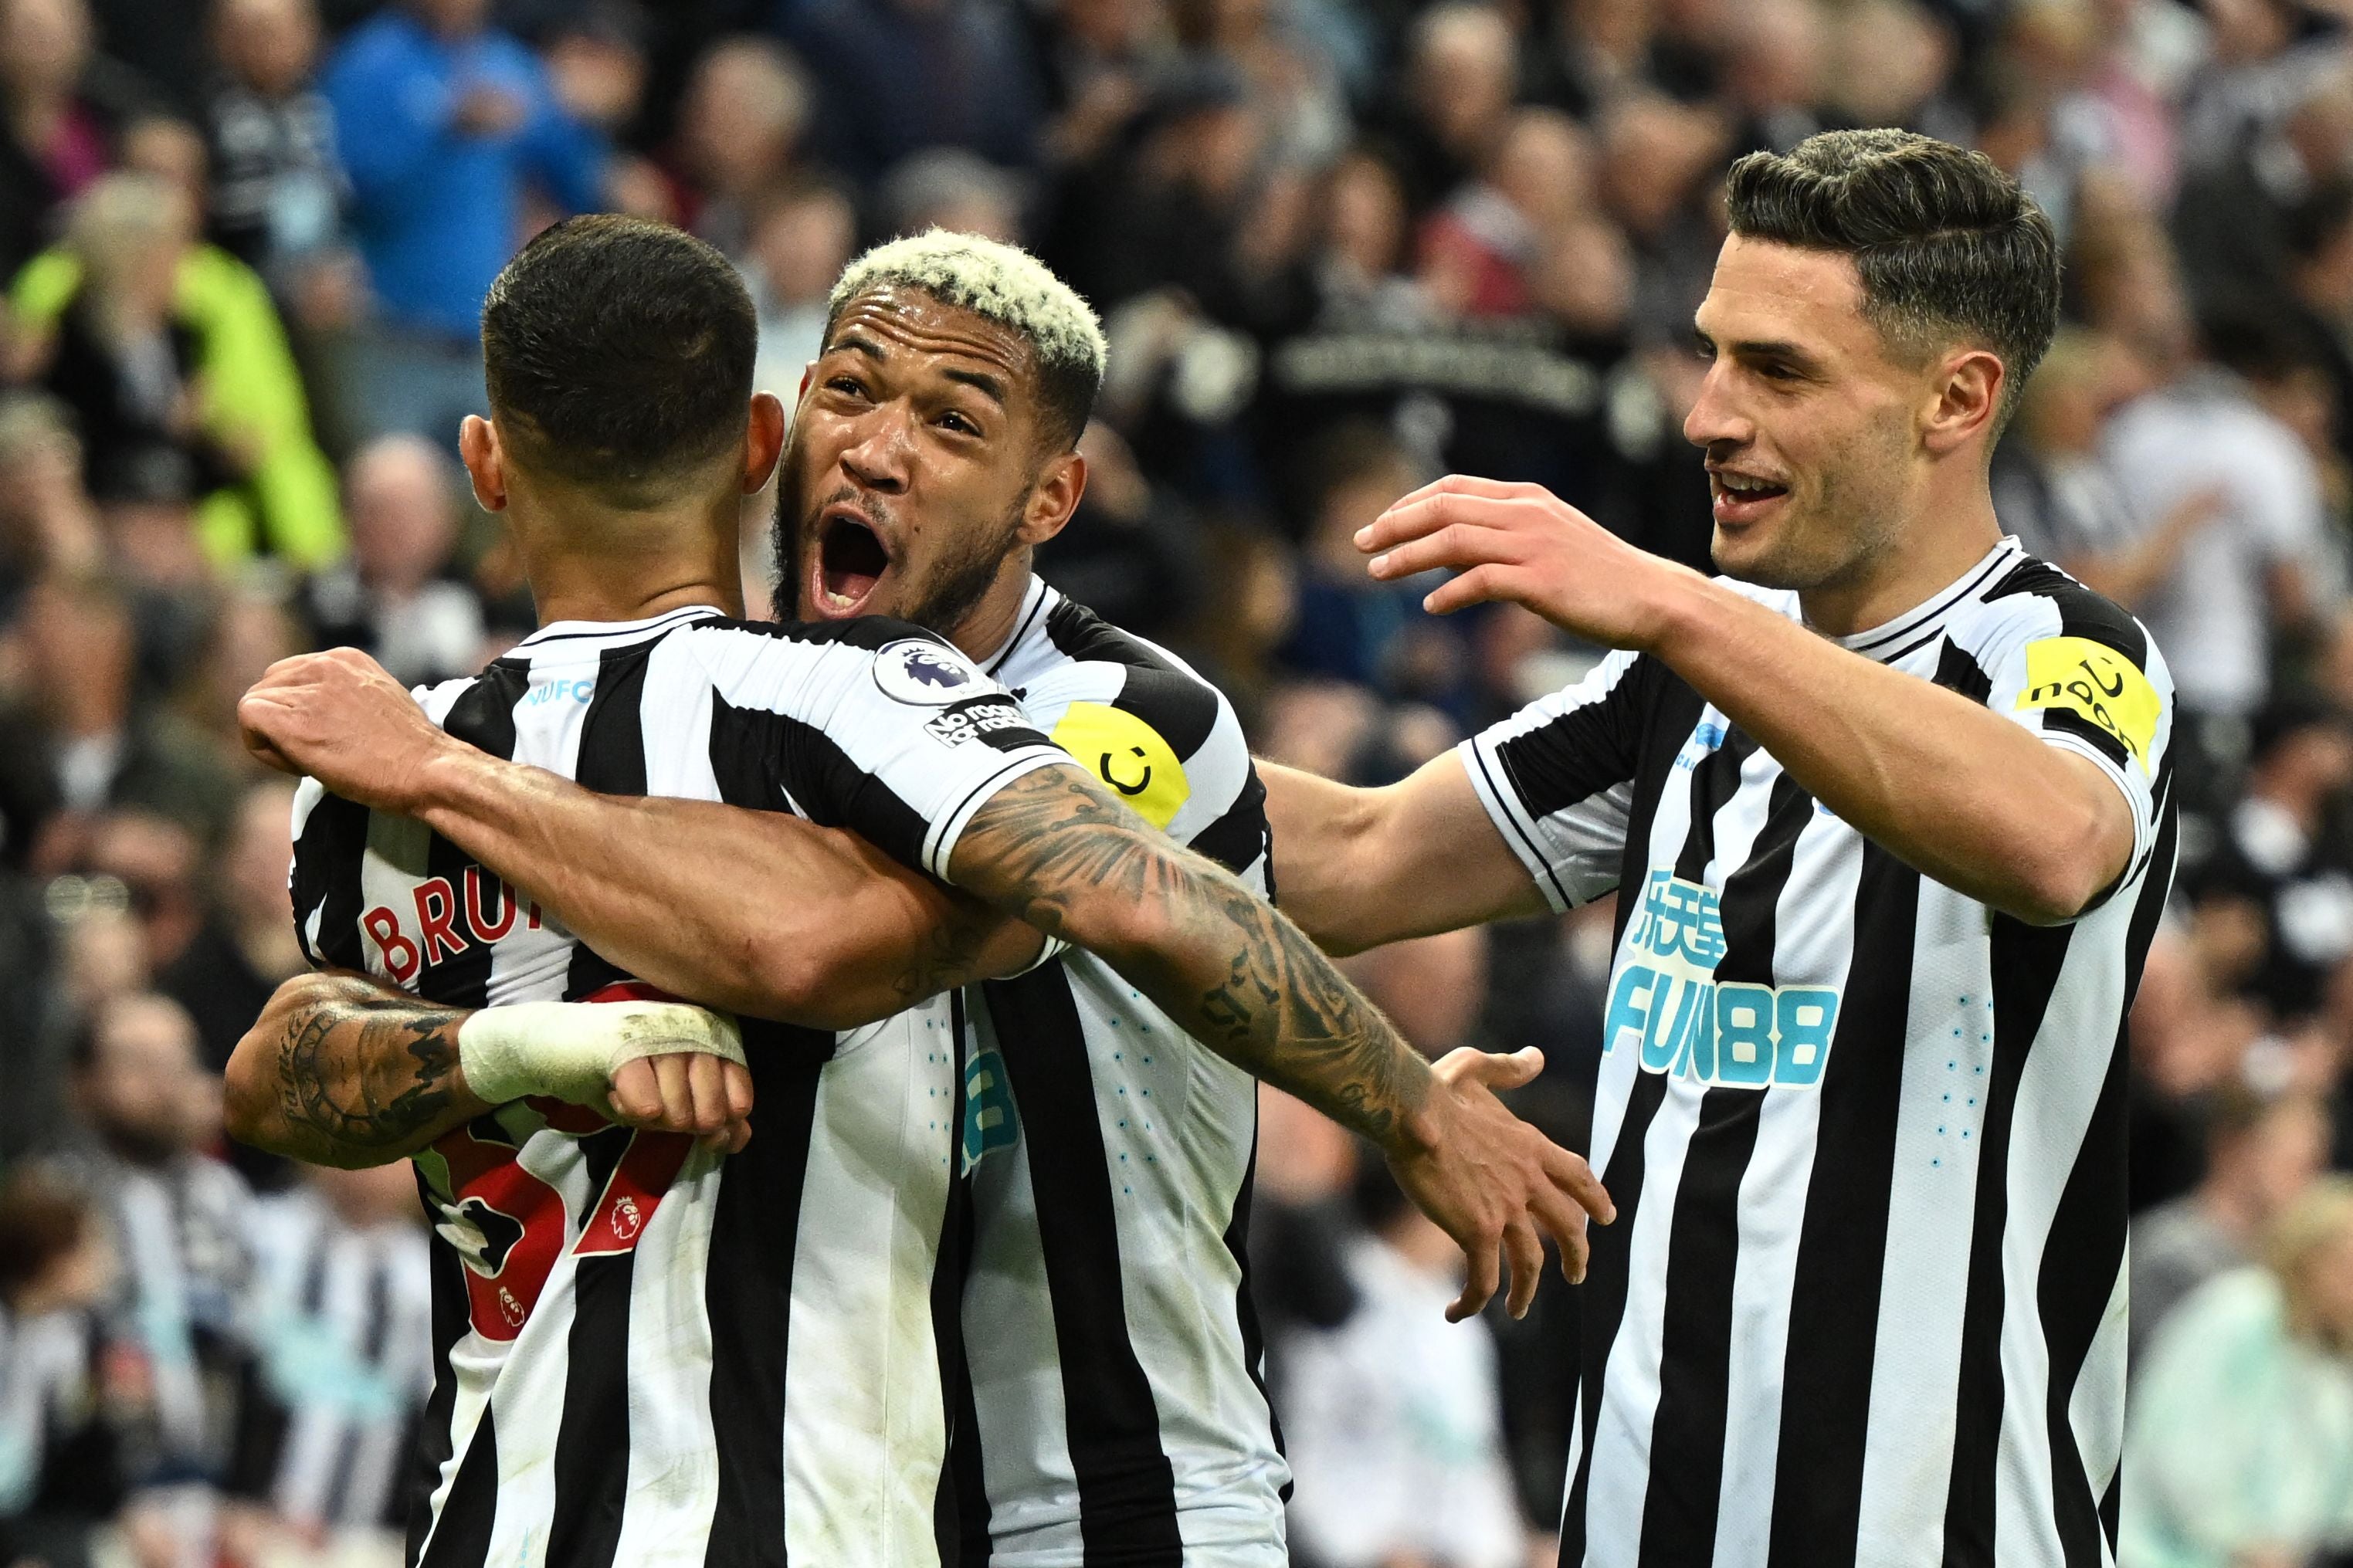 Newcastle were superb to ground the Seagulls